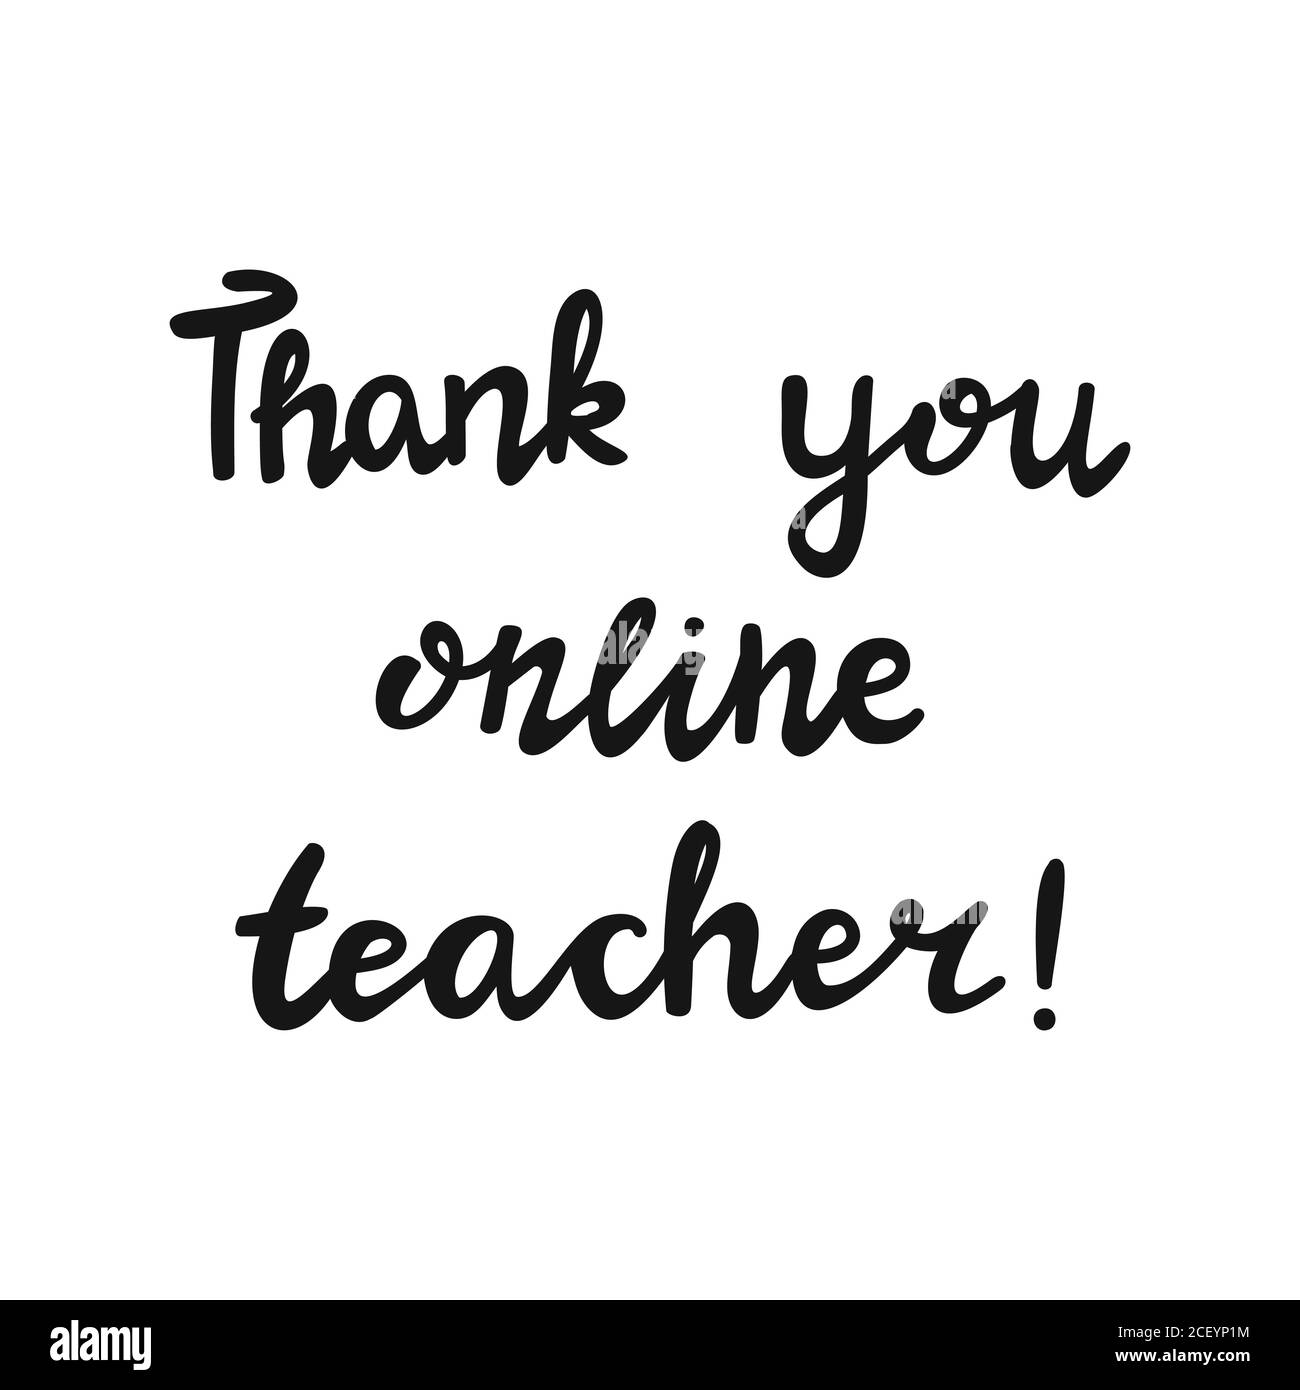 Thank you online teacher. Handwritten education quote. Isolated on white background. Vector stock illustration. Stock Vector